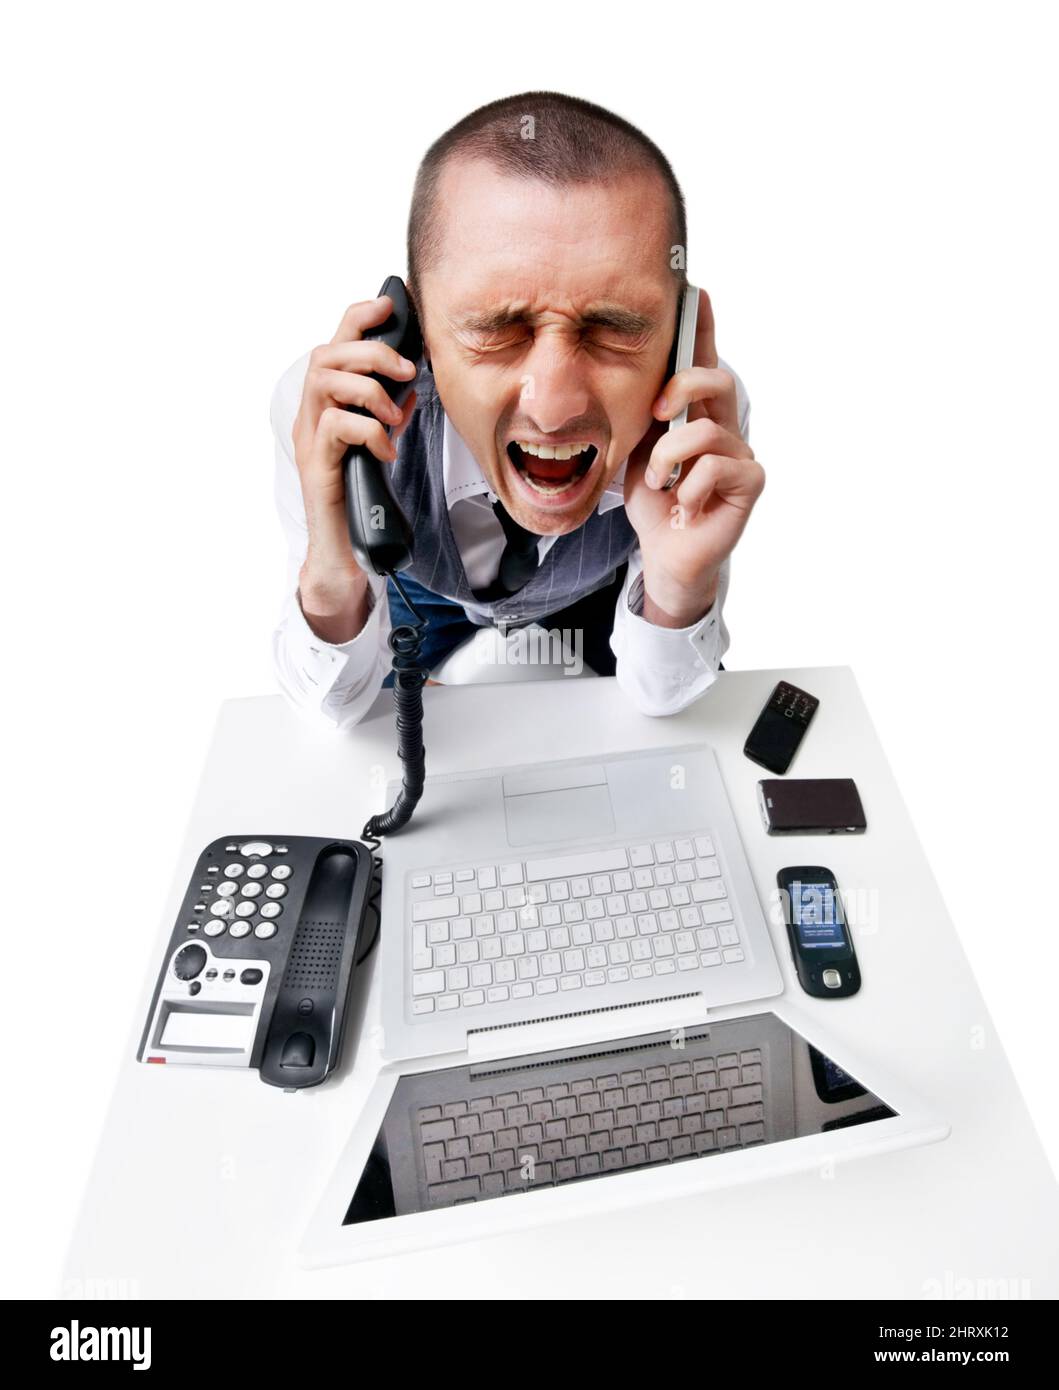 Dealing with too much. A frustrated young man trying to answer multiple phones and feeling stressed. Stock Photo